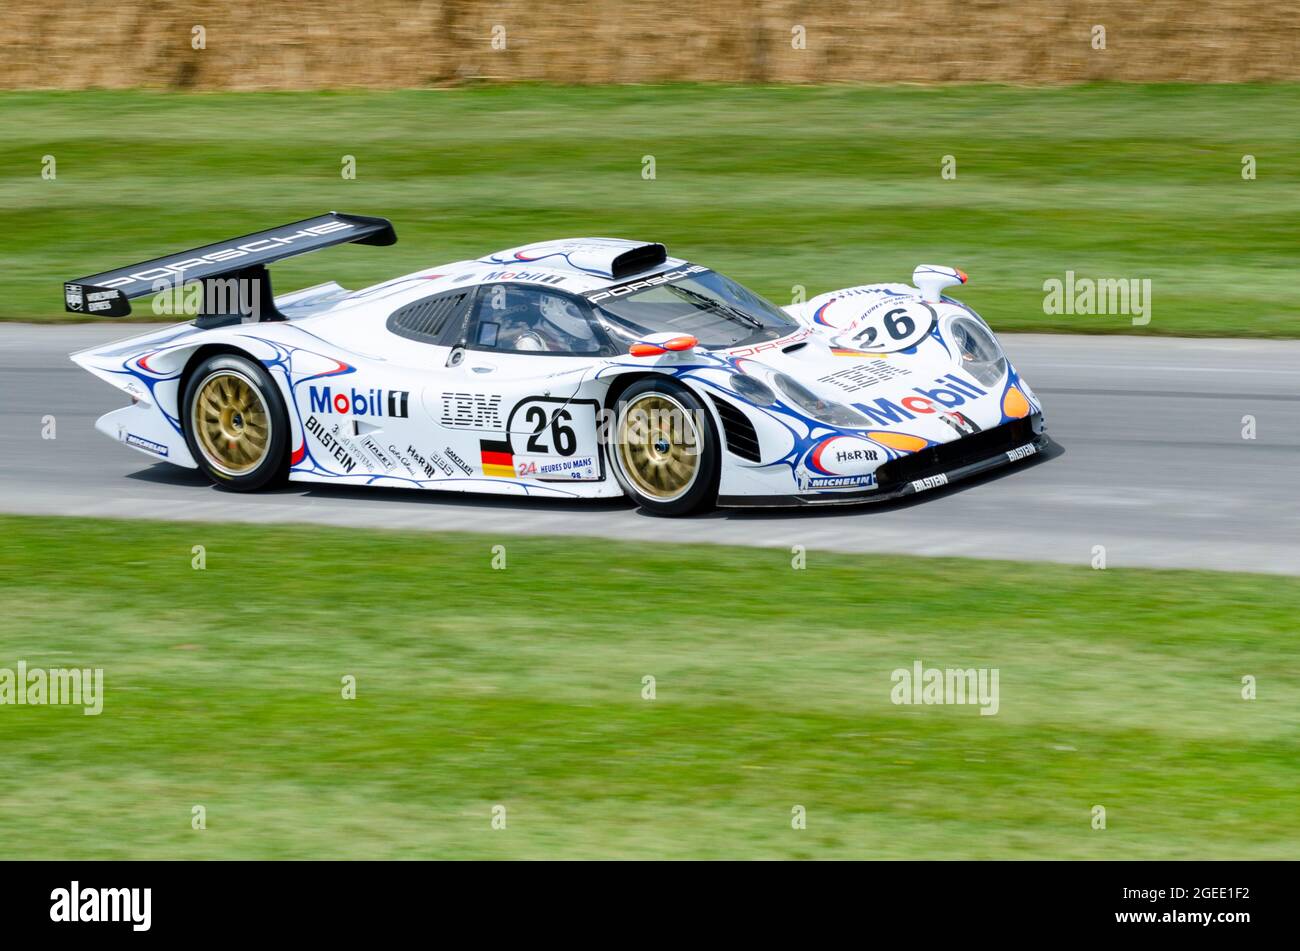 1998 Le Mans-winning Porsche 911 GT1 racing car driving up the hill climb  track at the Goodwood Festival of Speed motor racing event 2014 Stock Photo  - Alamy